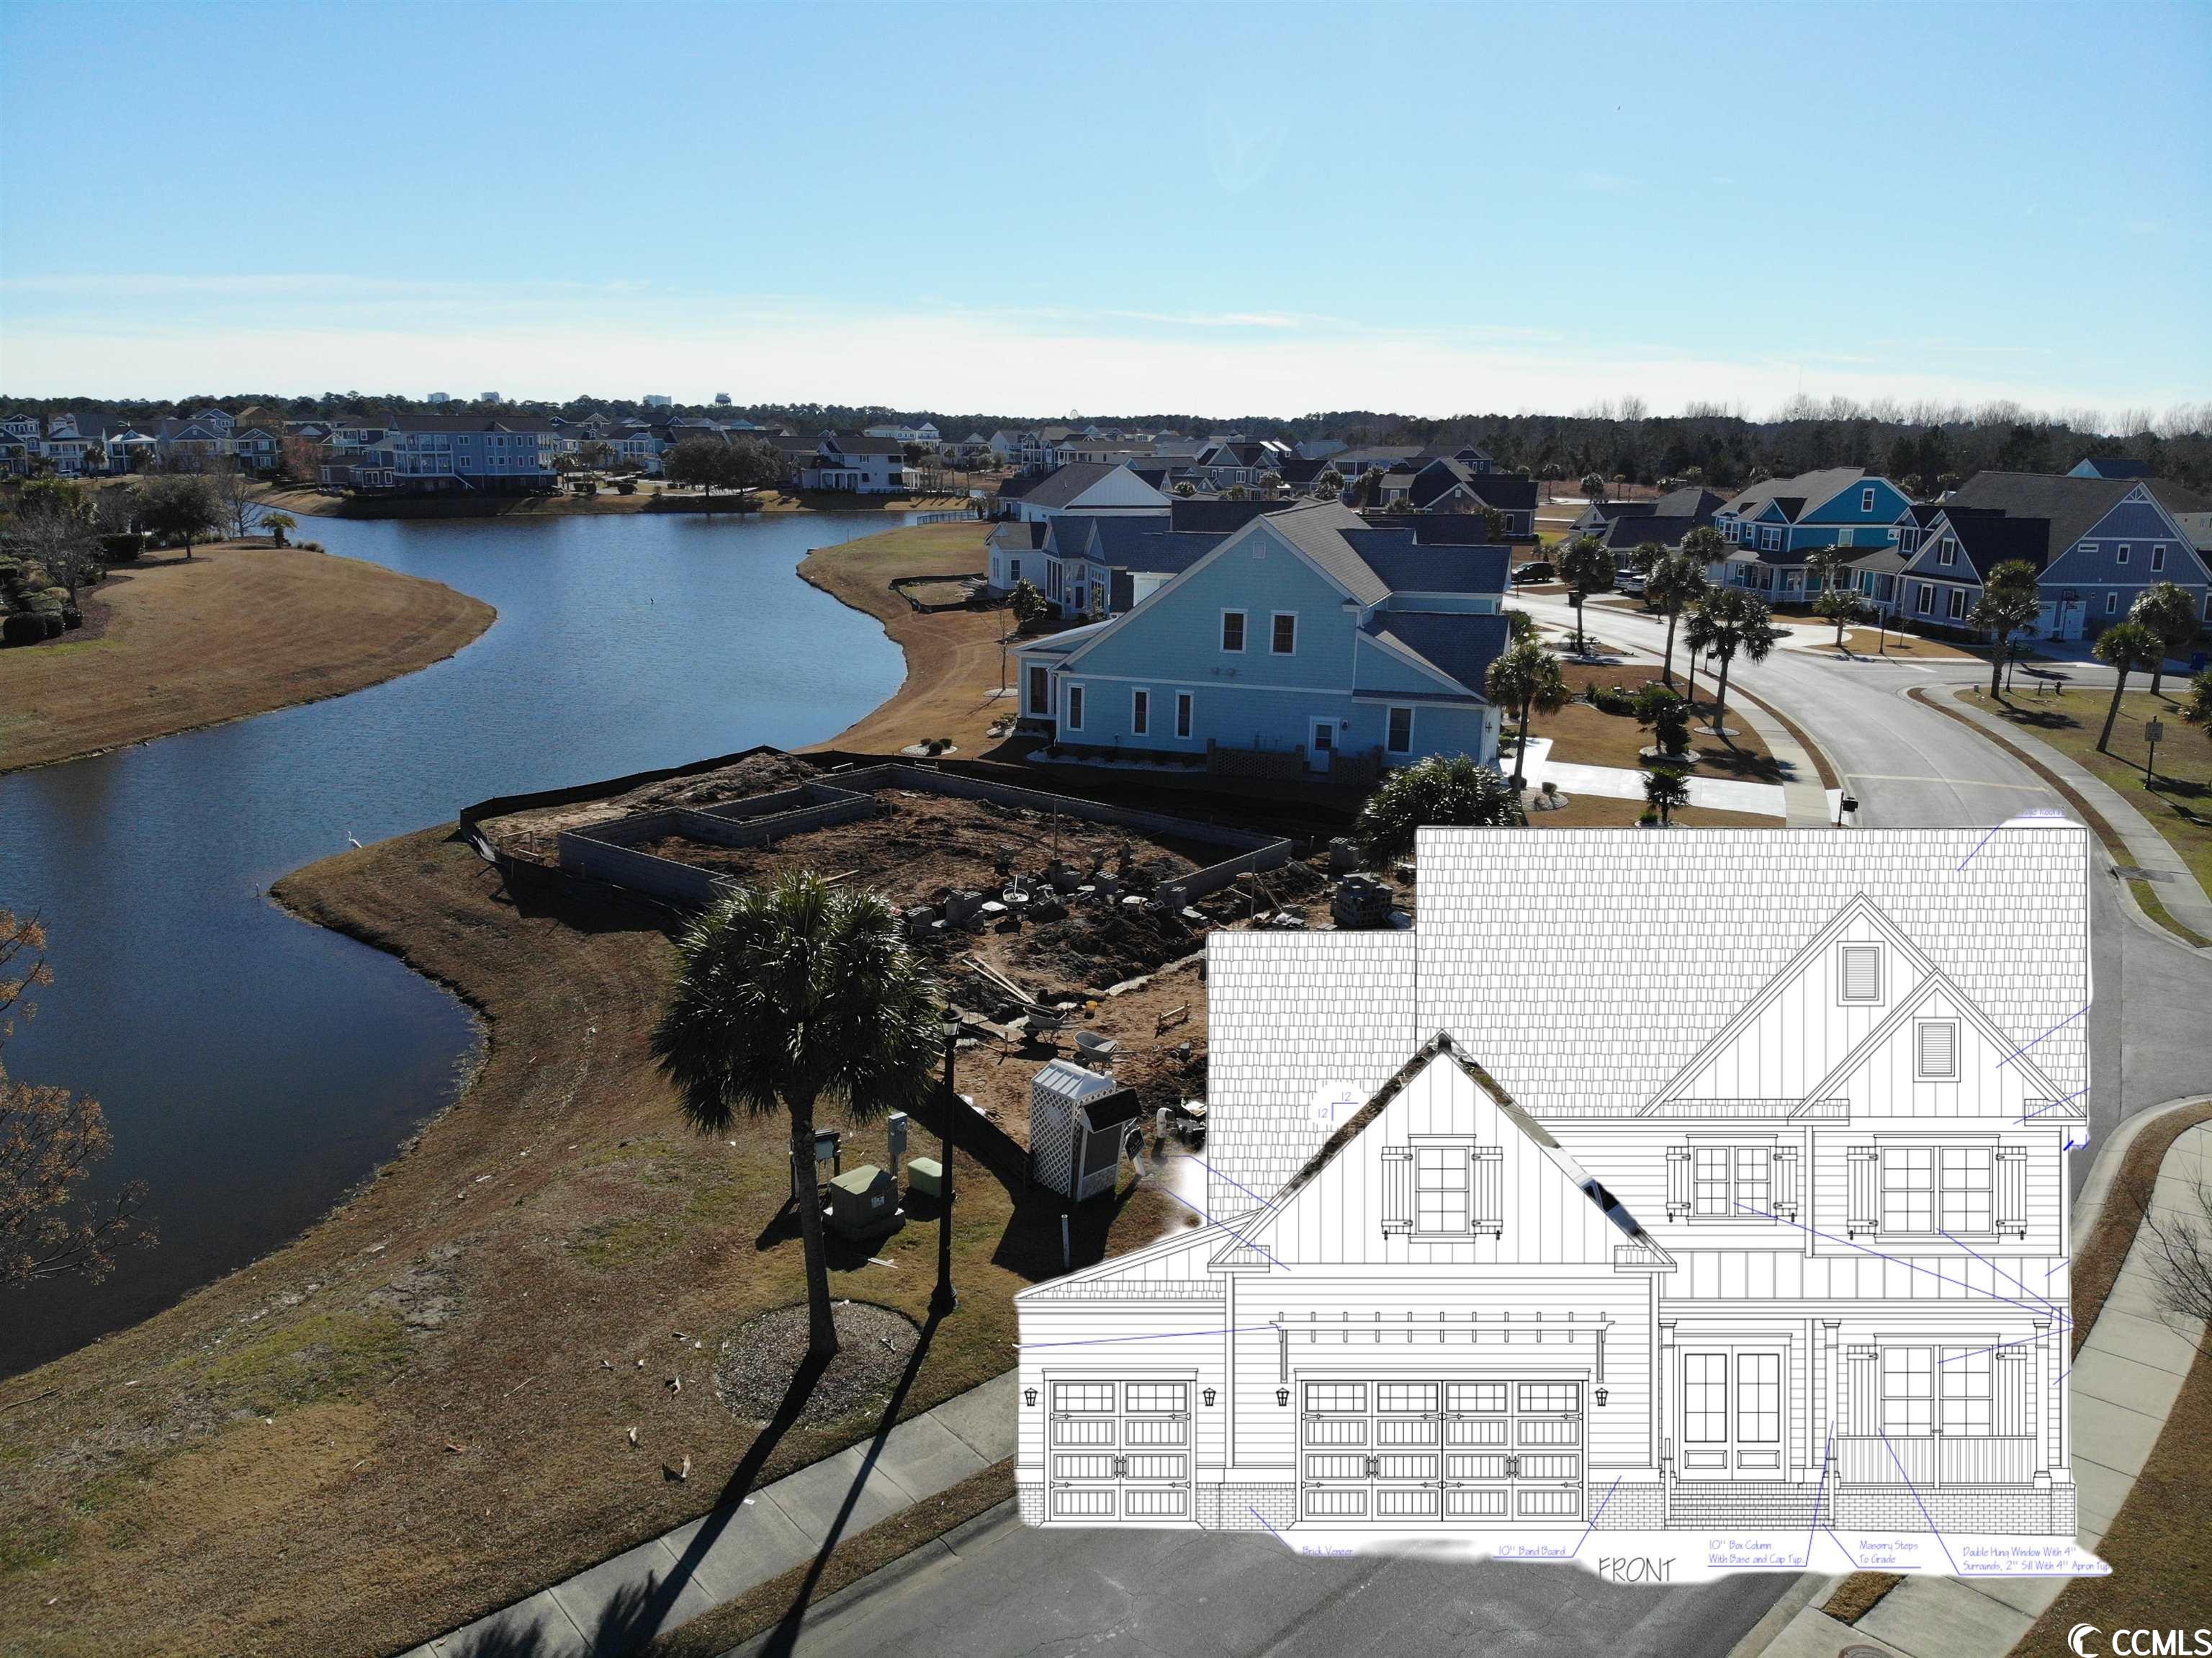 101 West Isle of Palms Ave., Myrtle Beach, SC 29579